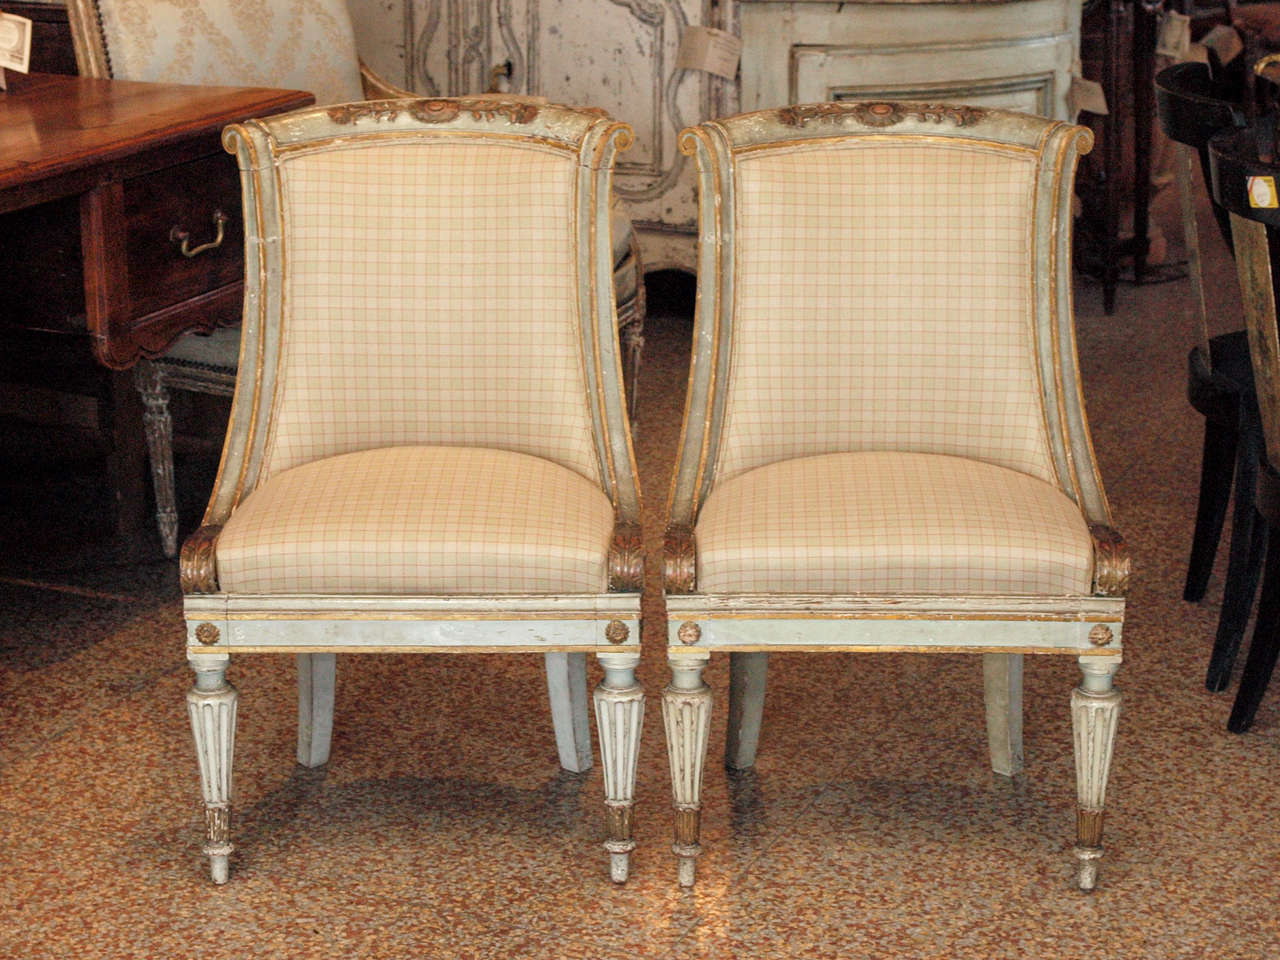 Pair of 19th century small directoire painted chairs with
gondola back and saber feet.  Gray green painted and gilded with a wood carved applique on the crest of the chairs.
Newly upholstered.